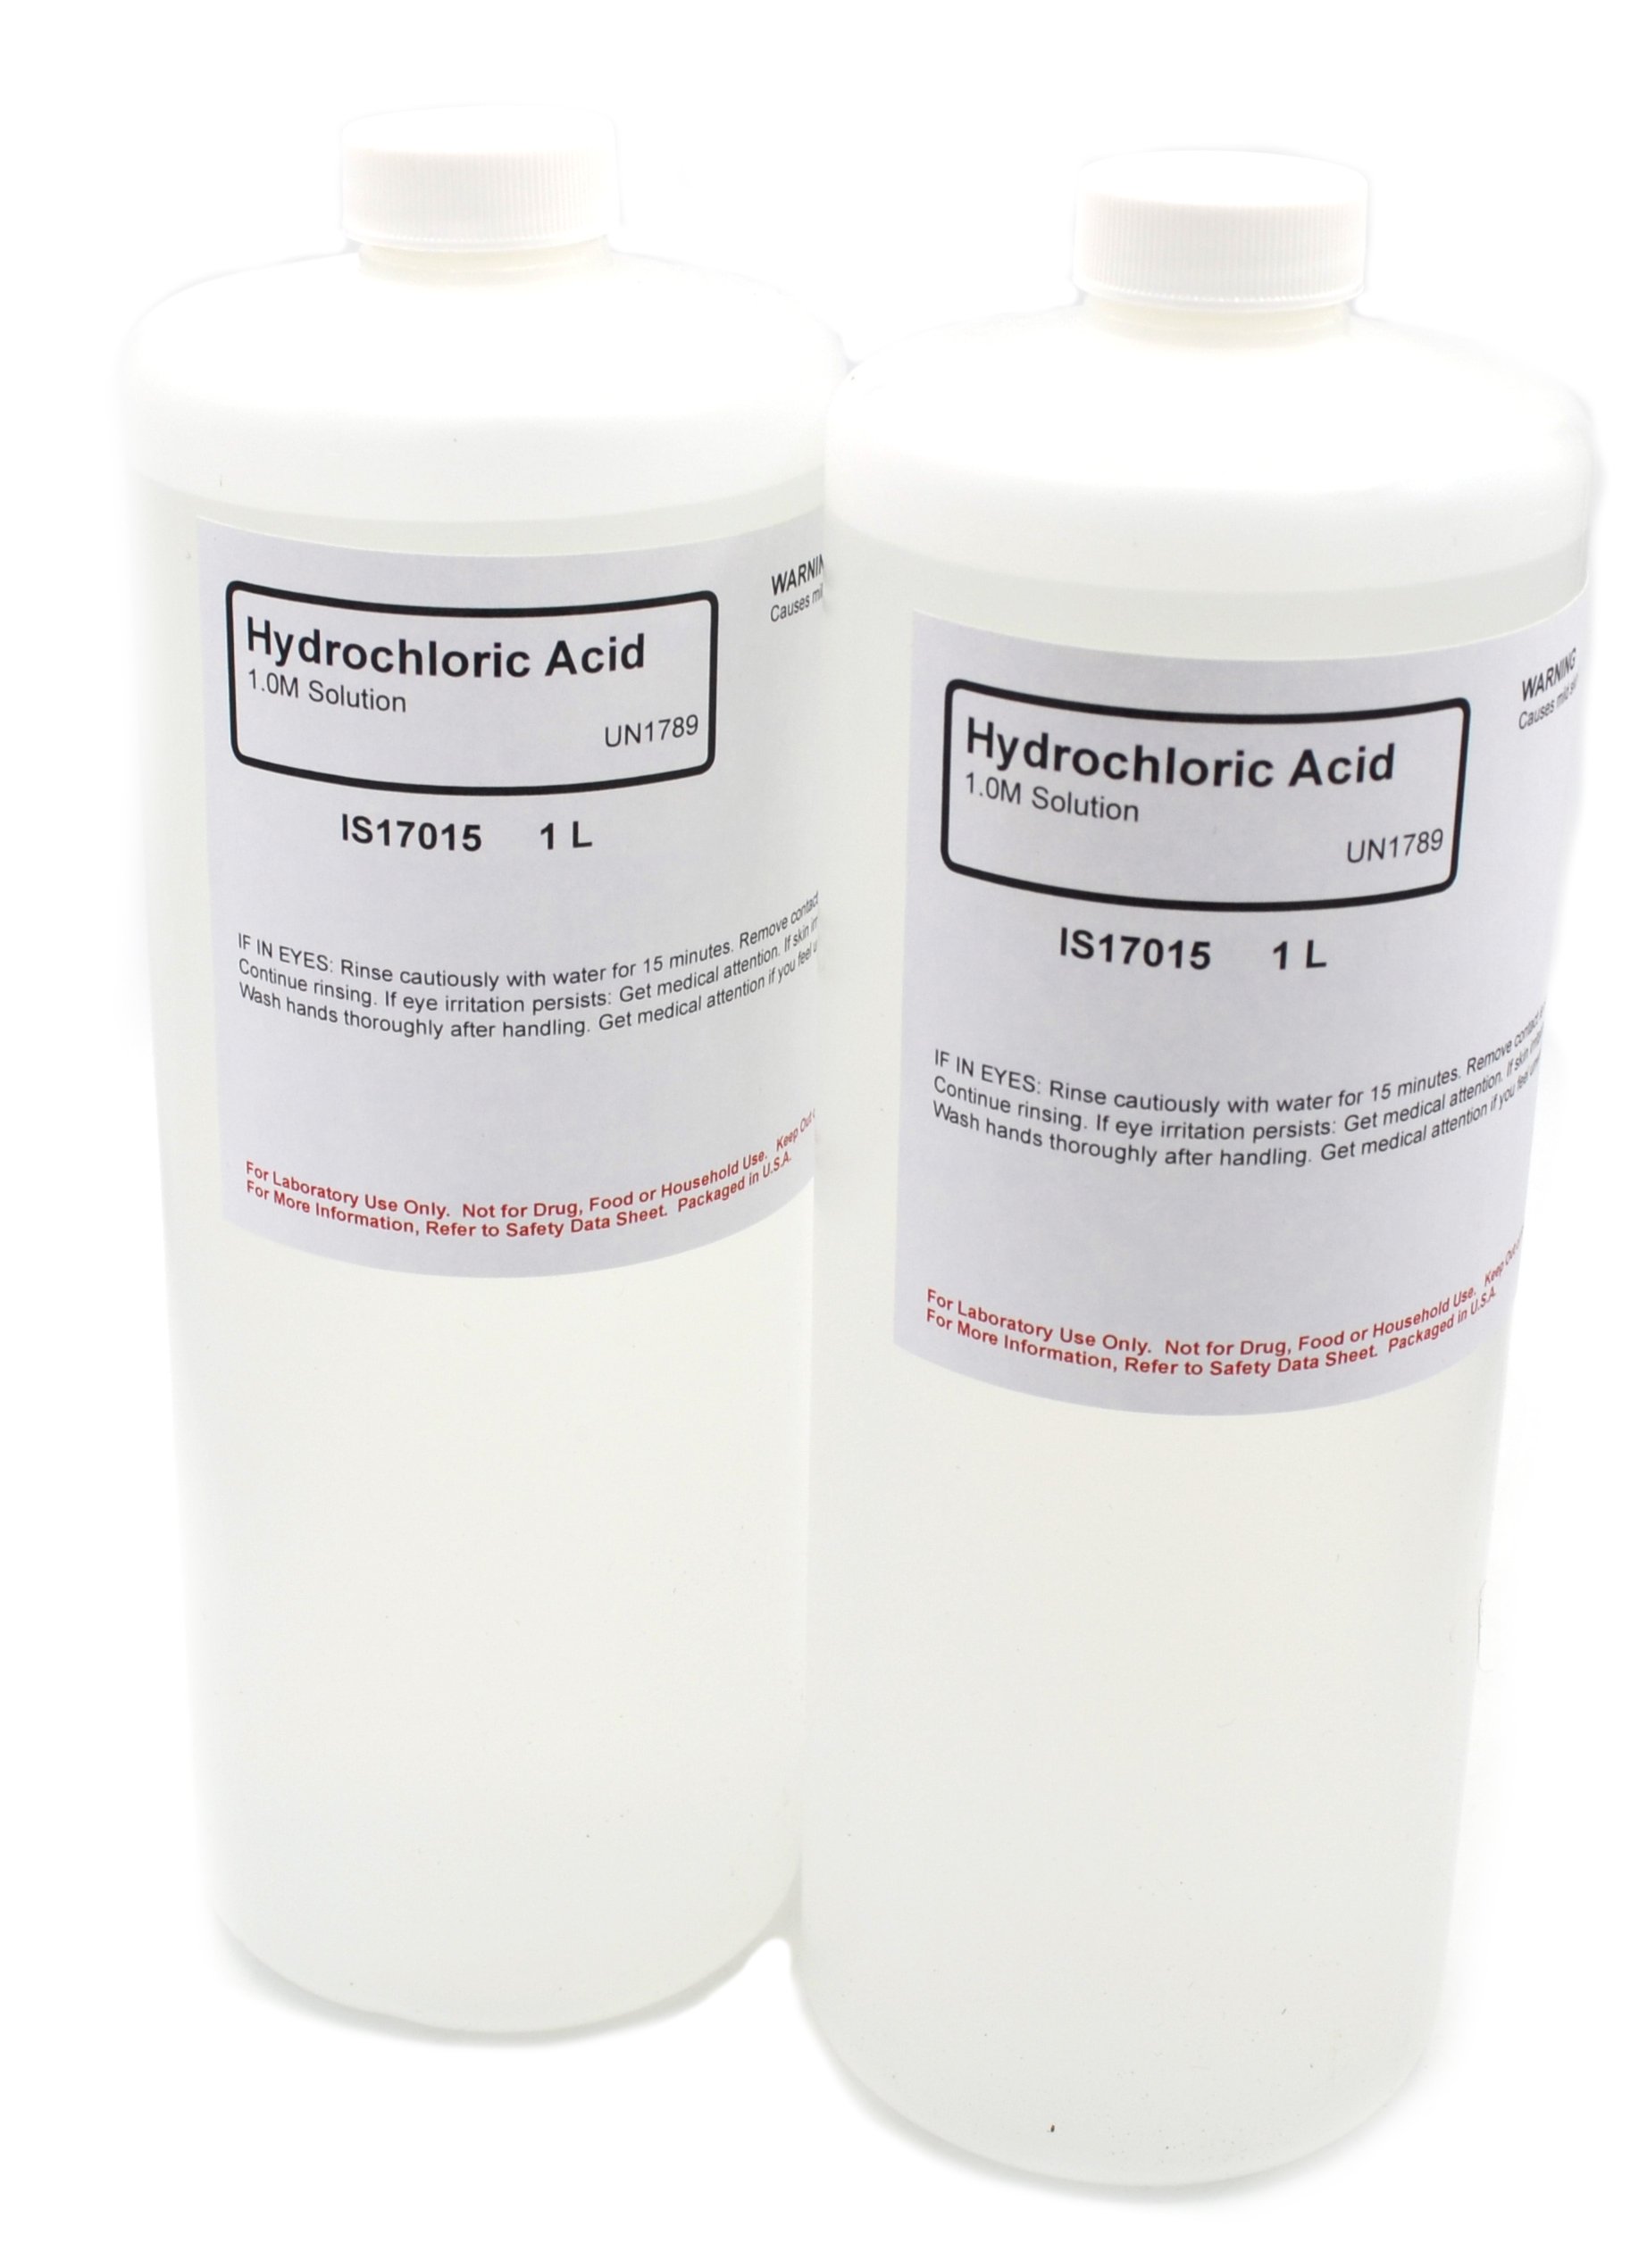 Hydrochloric Acid Solution, 1.0M, 1L, Case of 2 - The Curated Chemical Collection